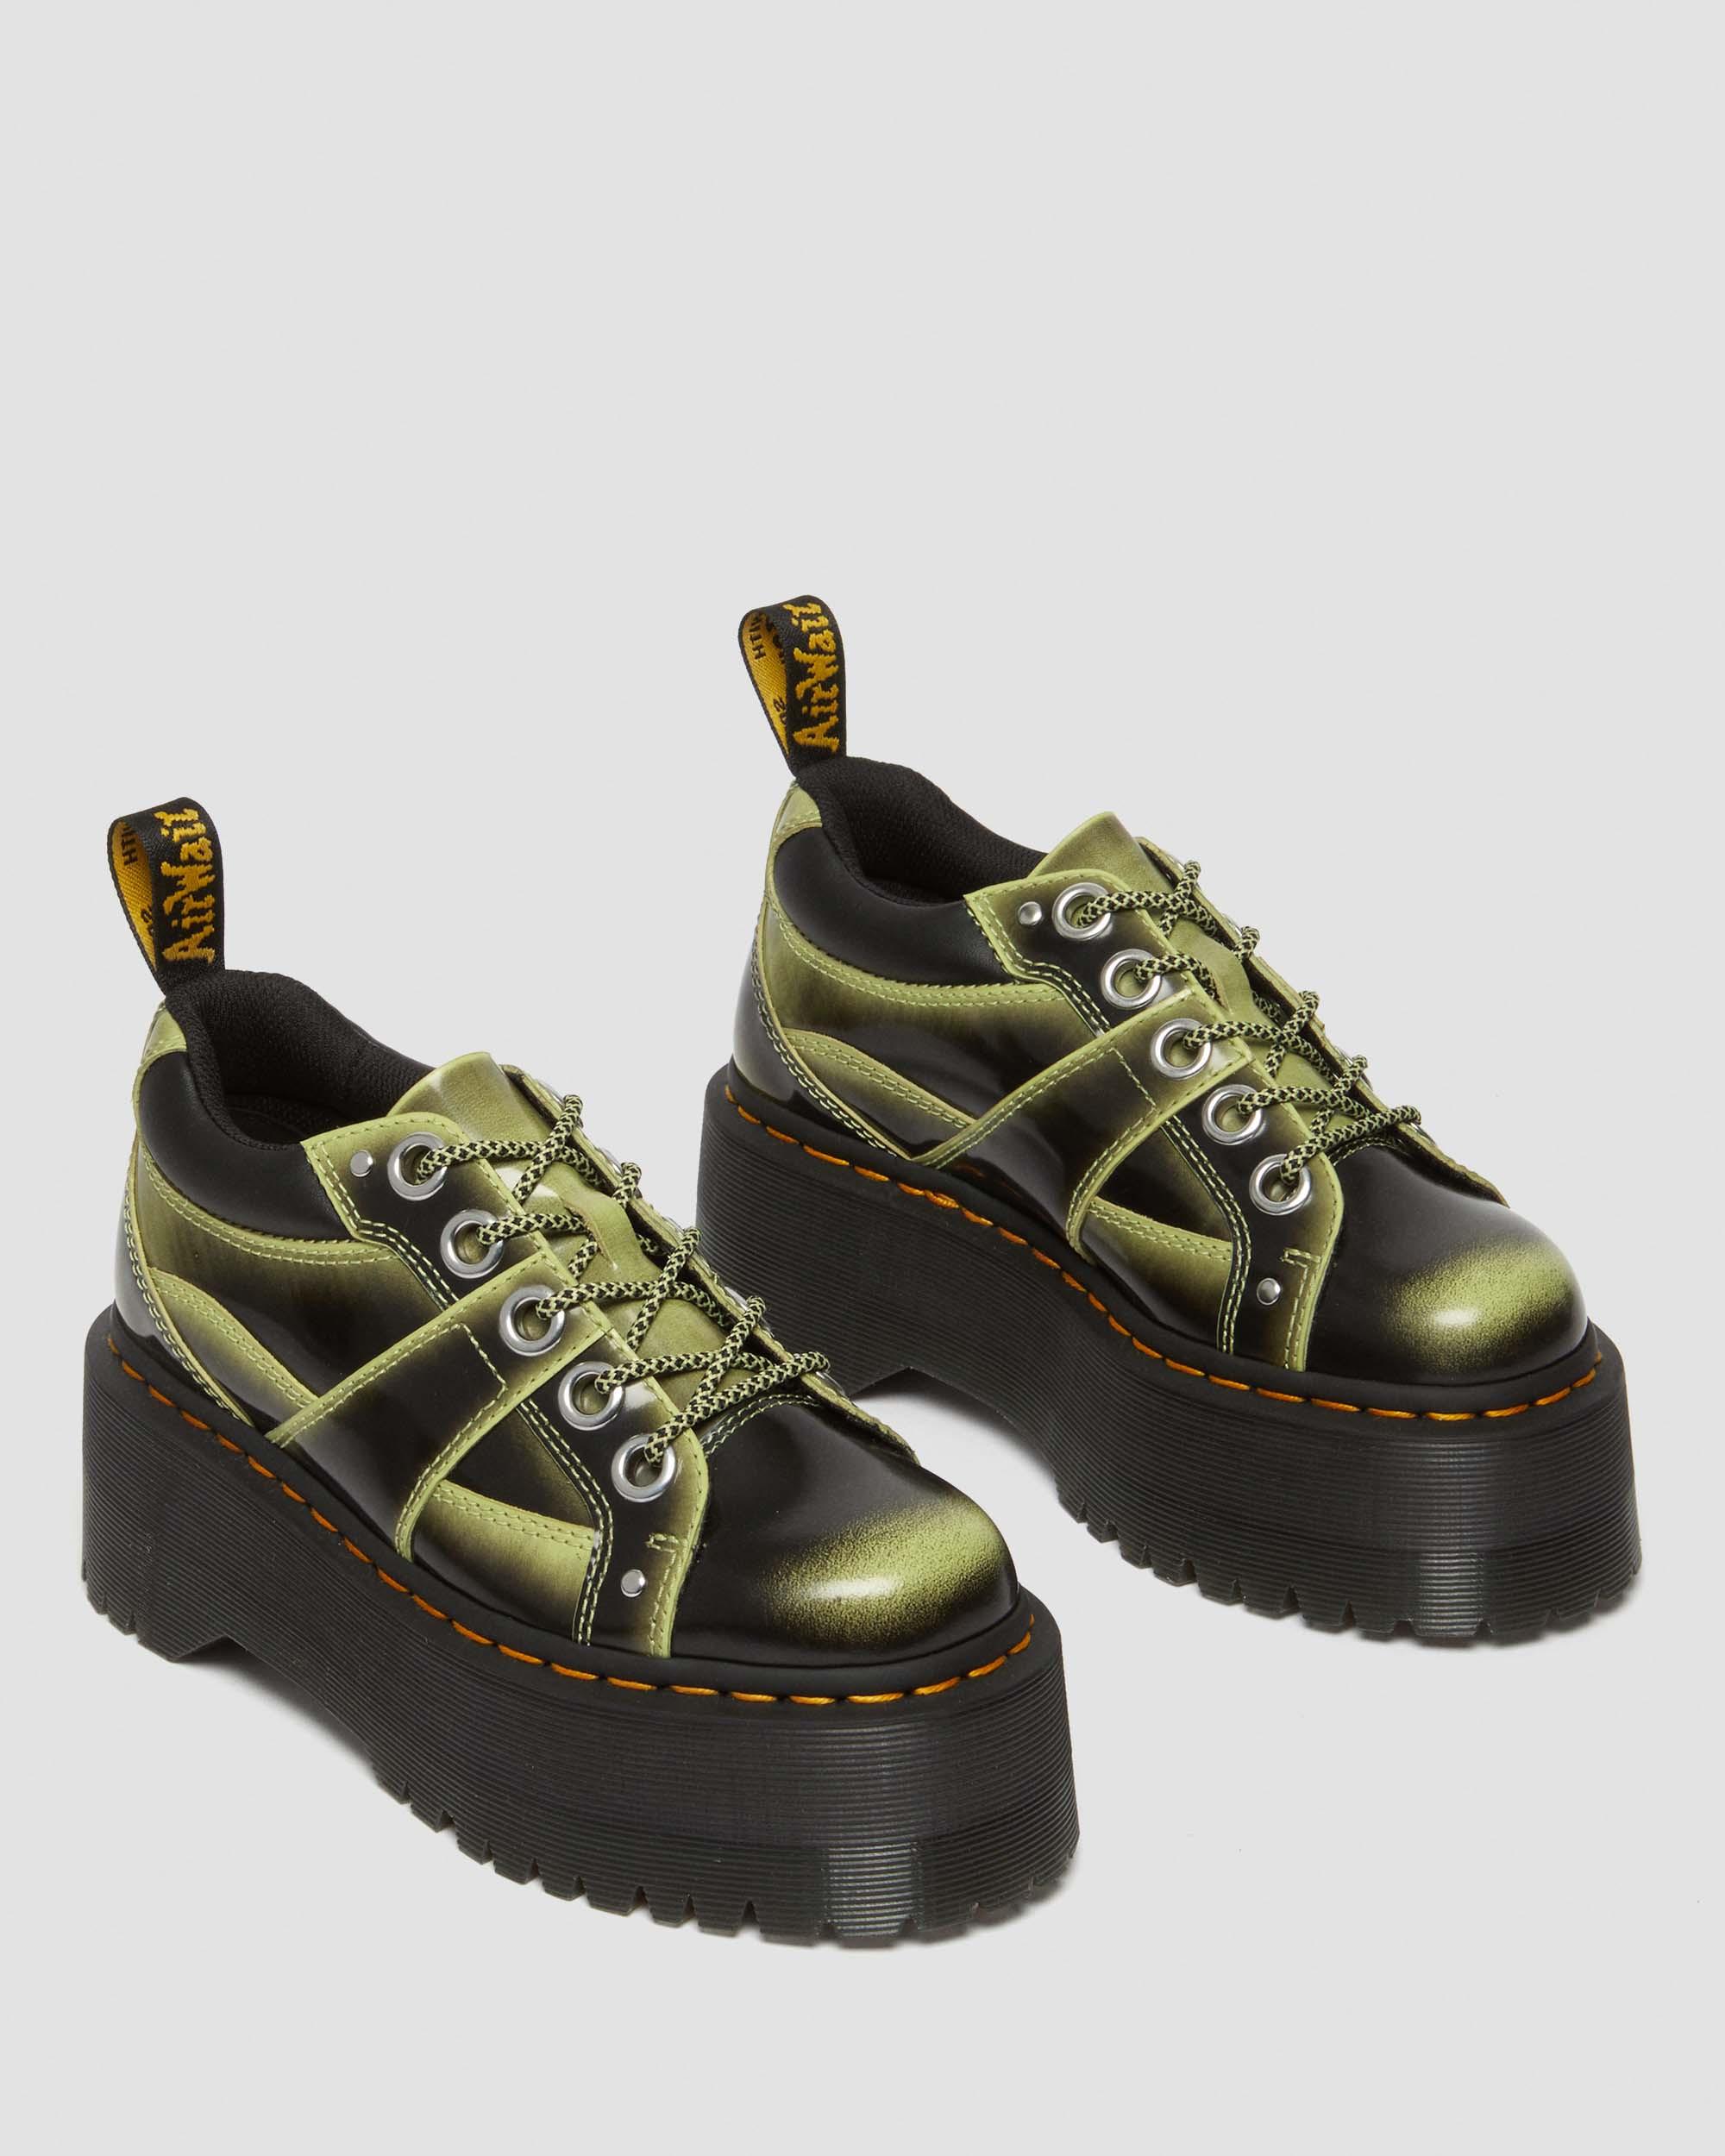 5-Eye Max Distressed Leather Platform Shoes in Lime Green